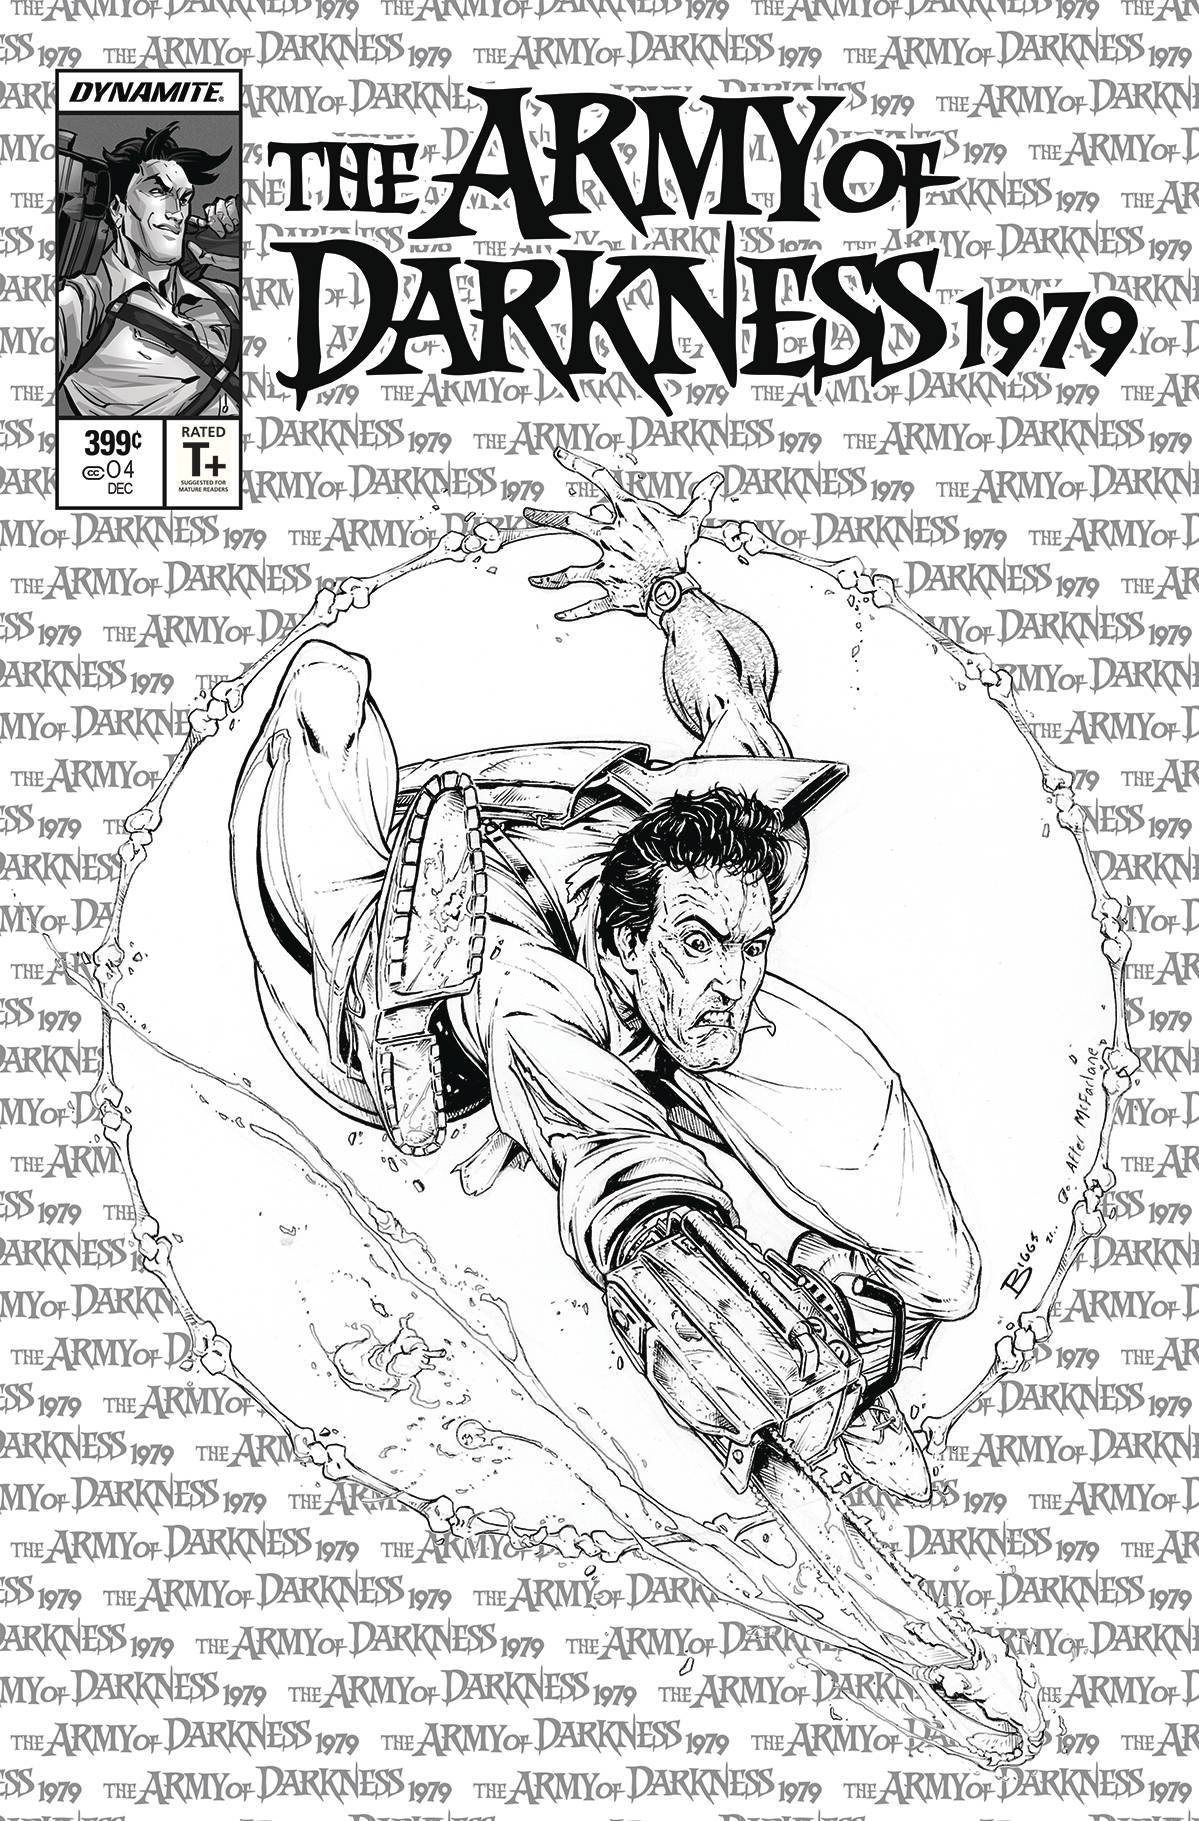 Army of Darkness 1979 #4 Cover N 11 Copy Last Call Incentive McFarlane Homage Variant